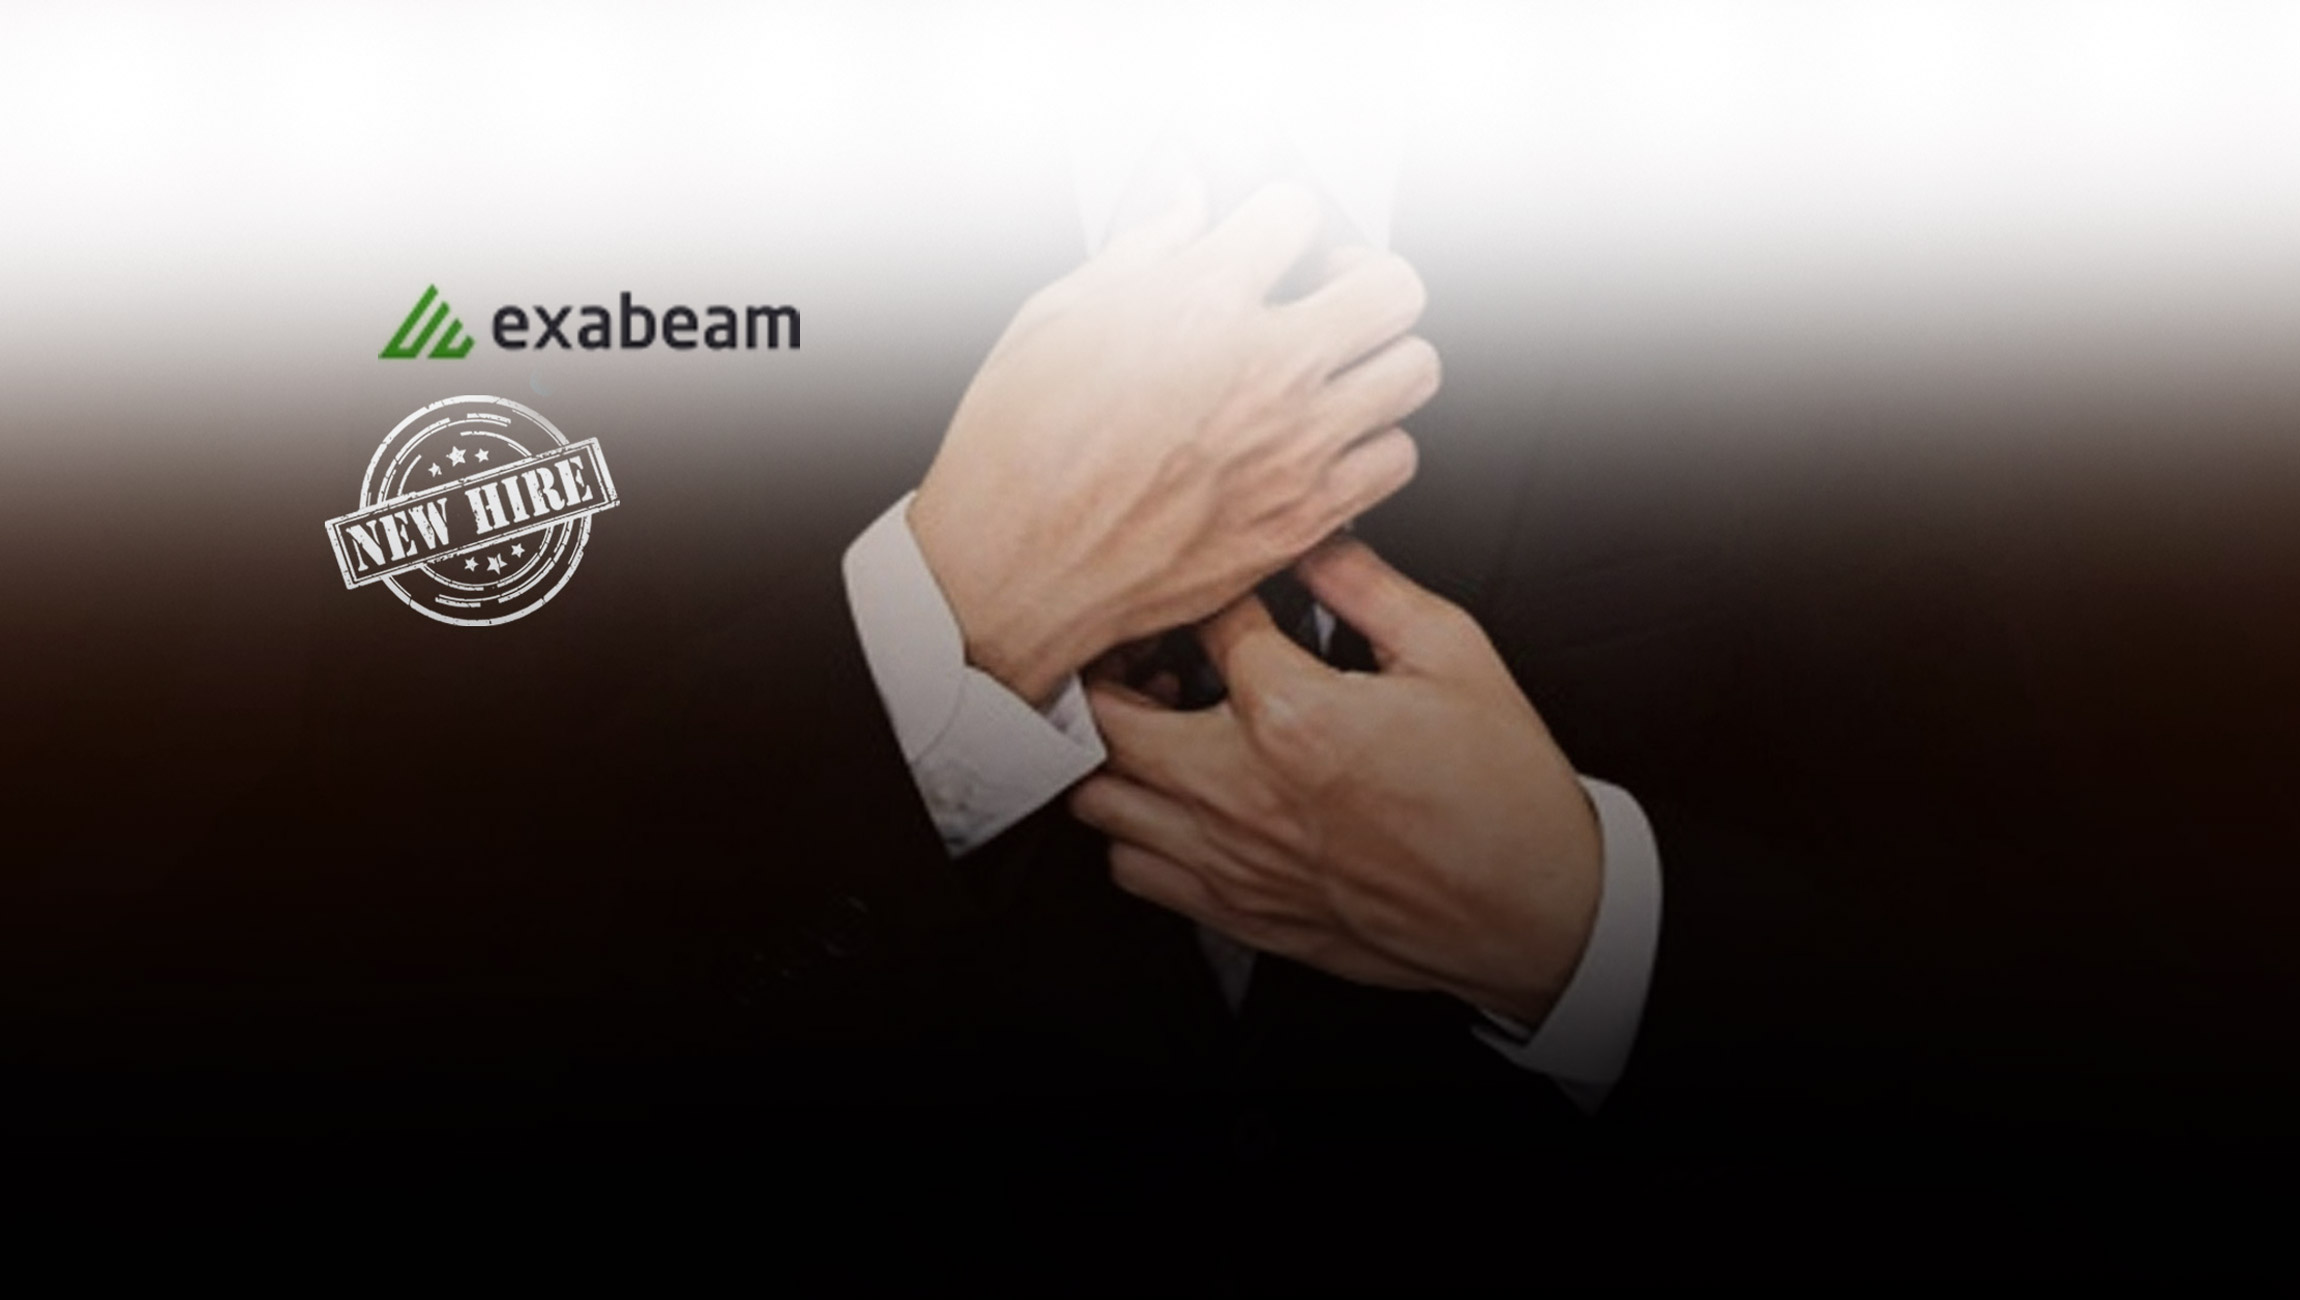 Exabeam Appoints Cybersecurity Industry Leader Pedro Abreu as Chief Operating Officer